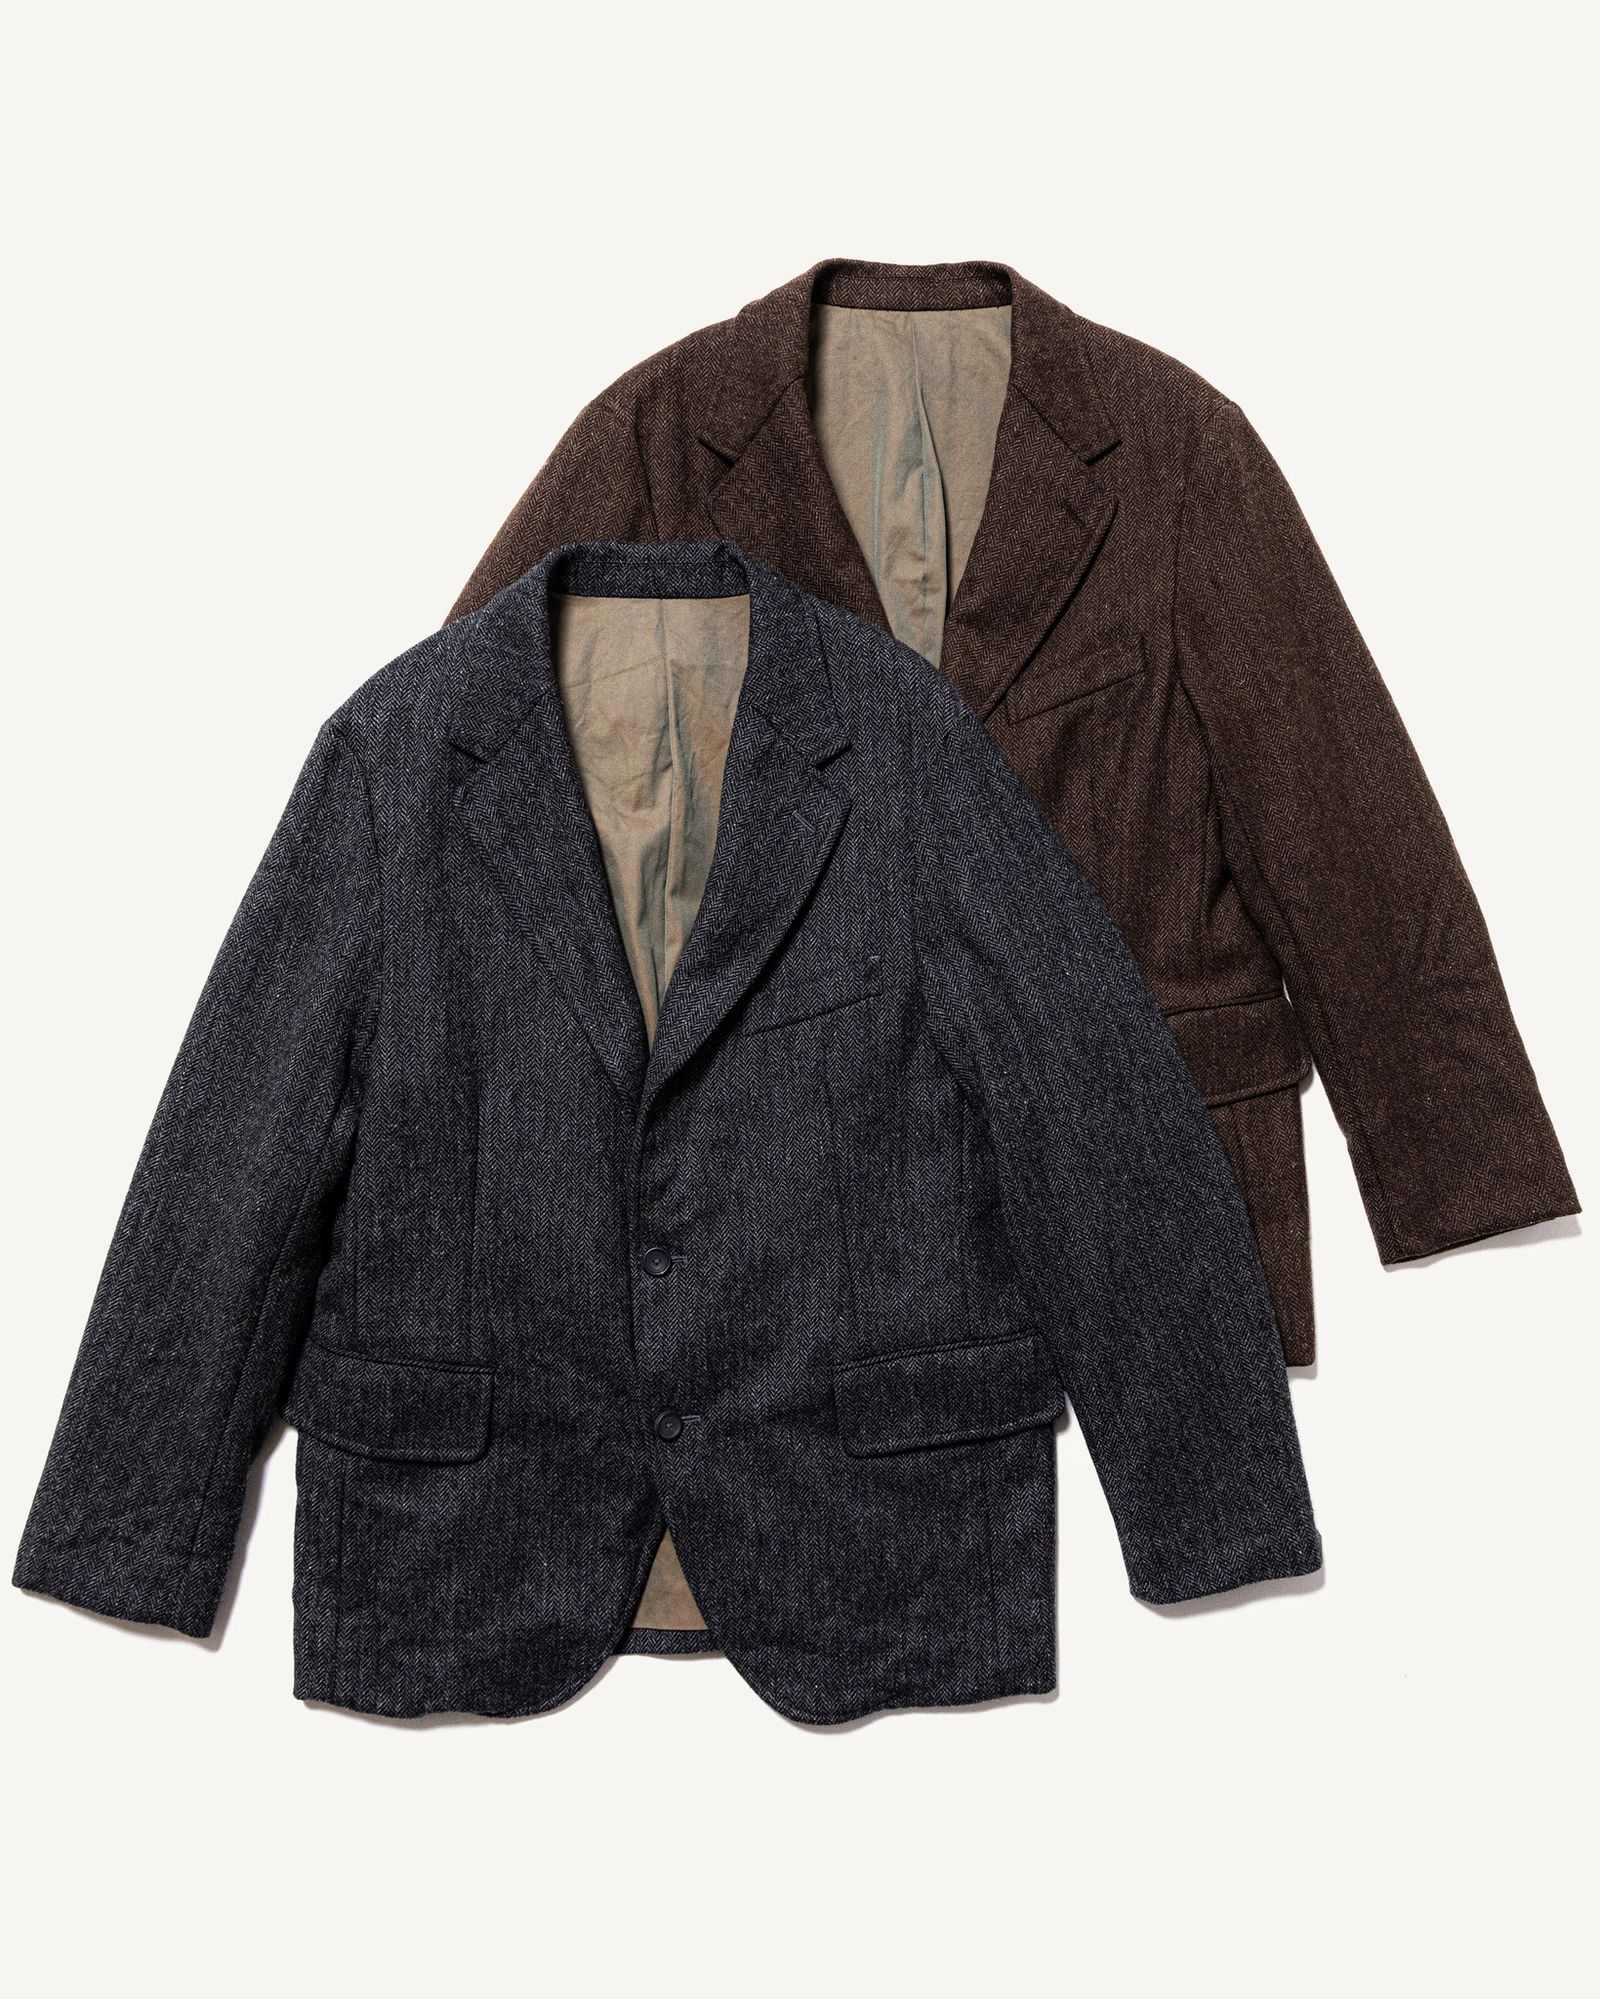 A.PRESSE - アプレッセ Tweed Tailored Jacket(23AAP-01-18H)CHARCOAL 